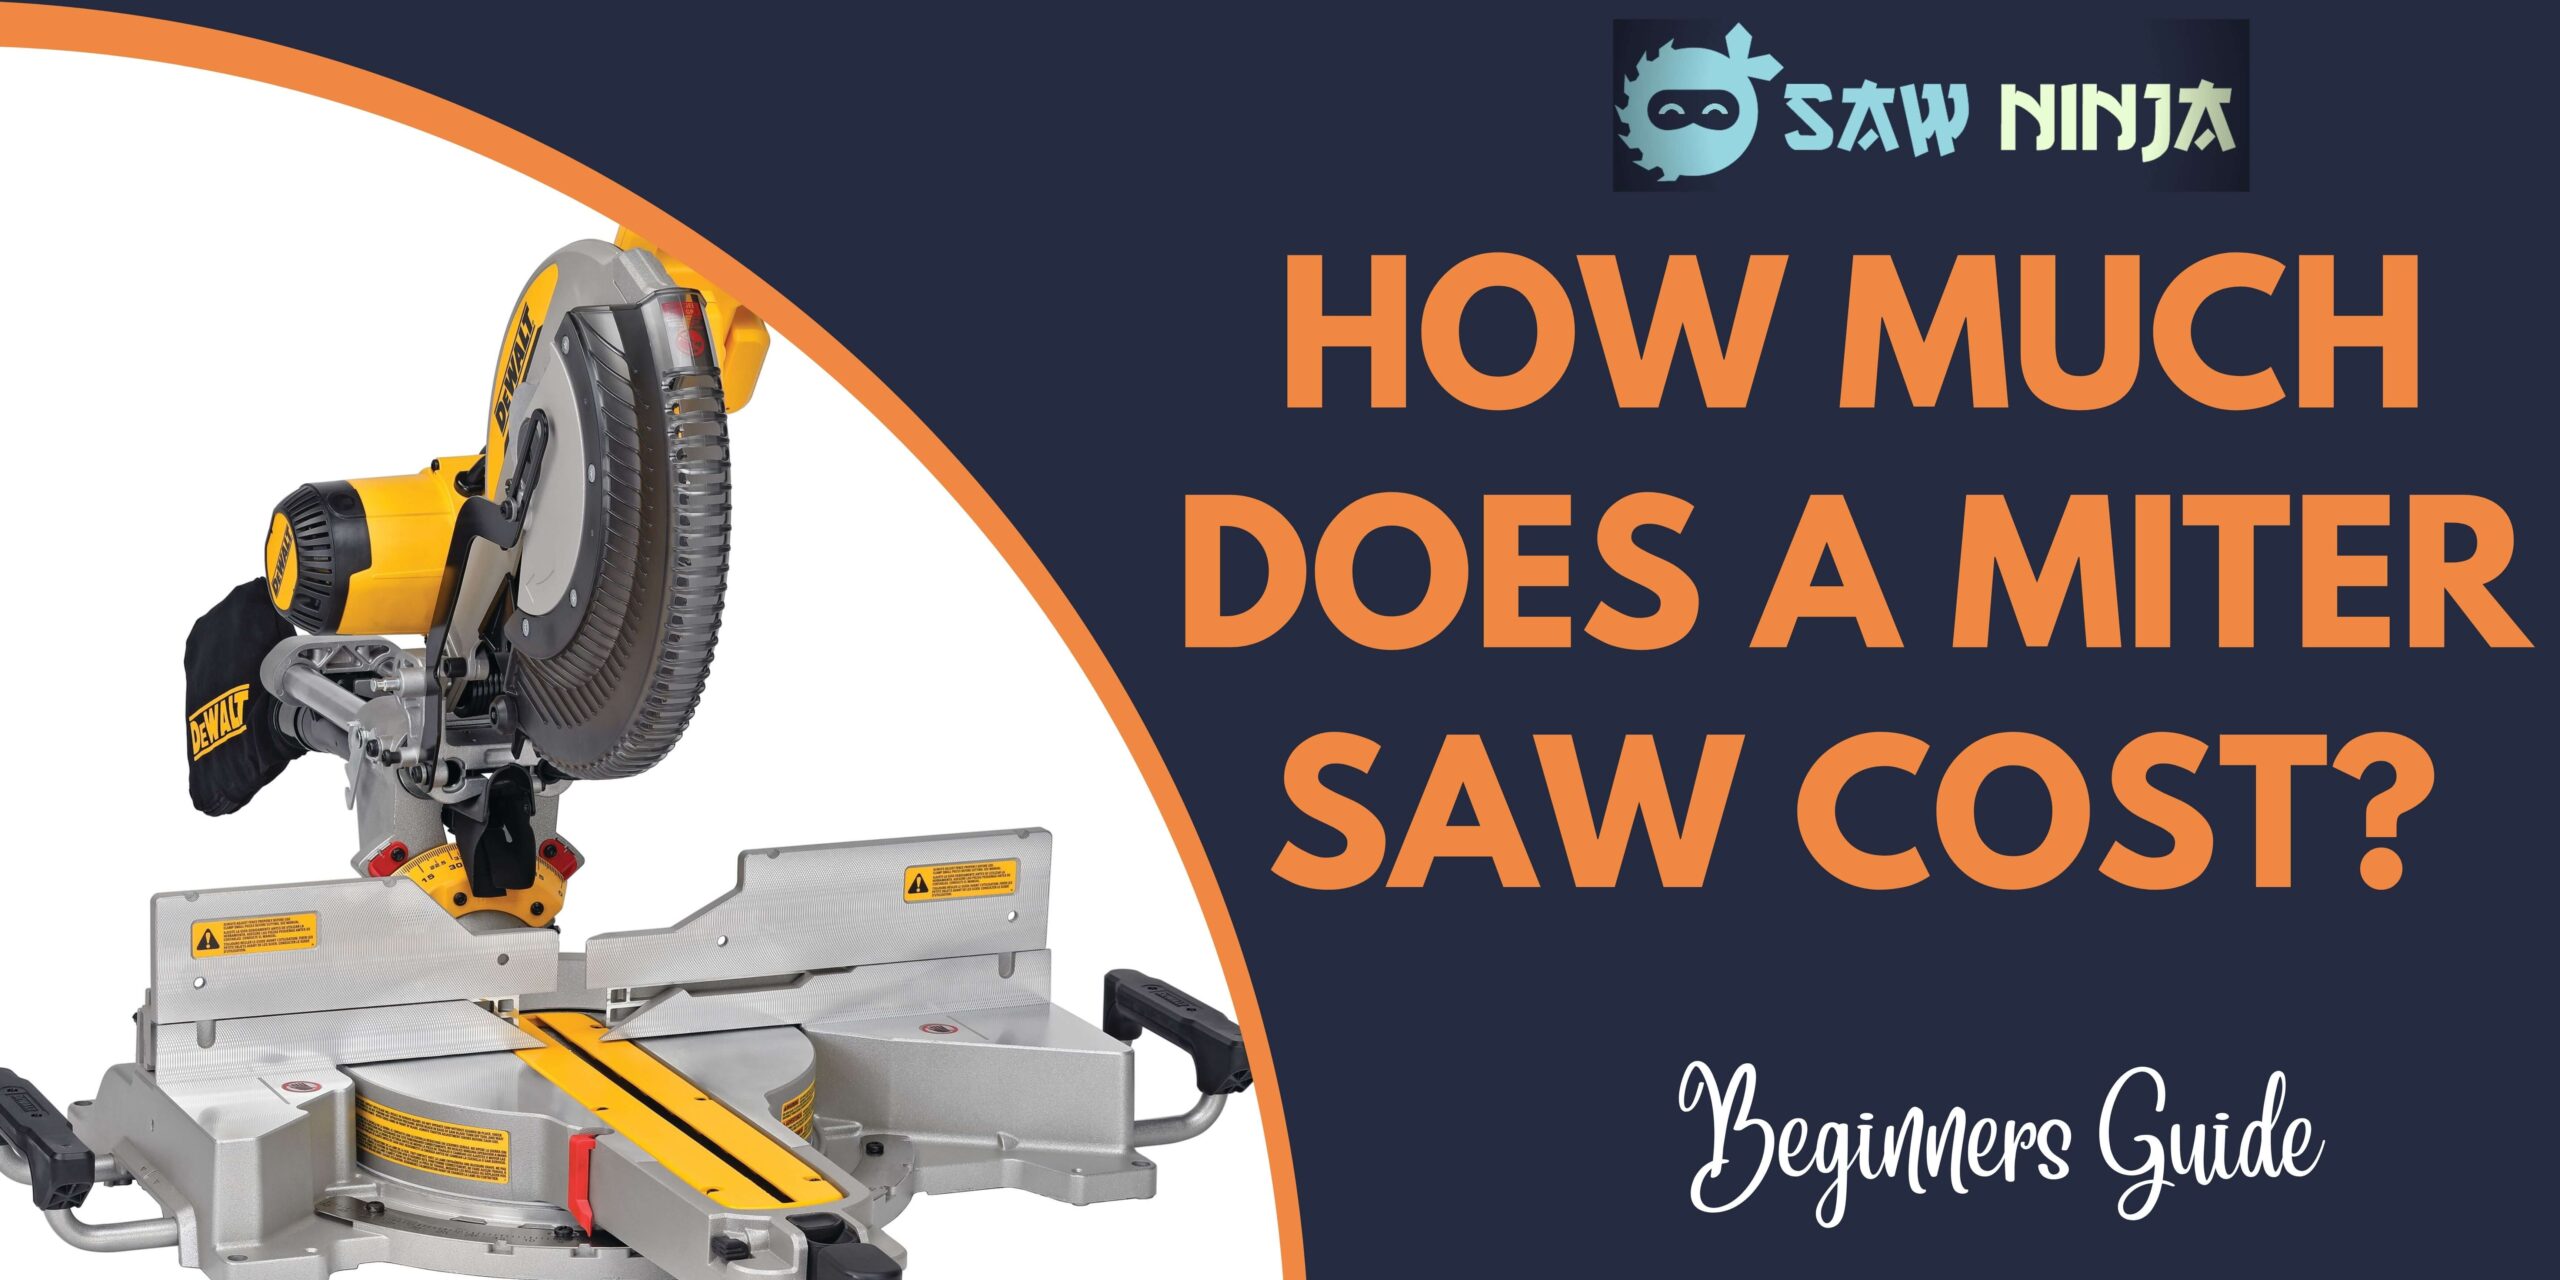 How Much Does a Miter Saw Cost